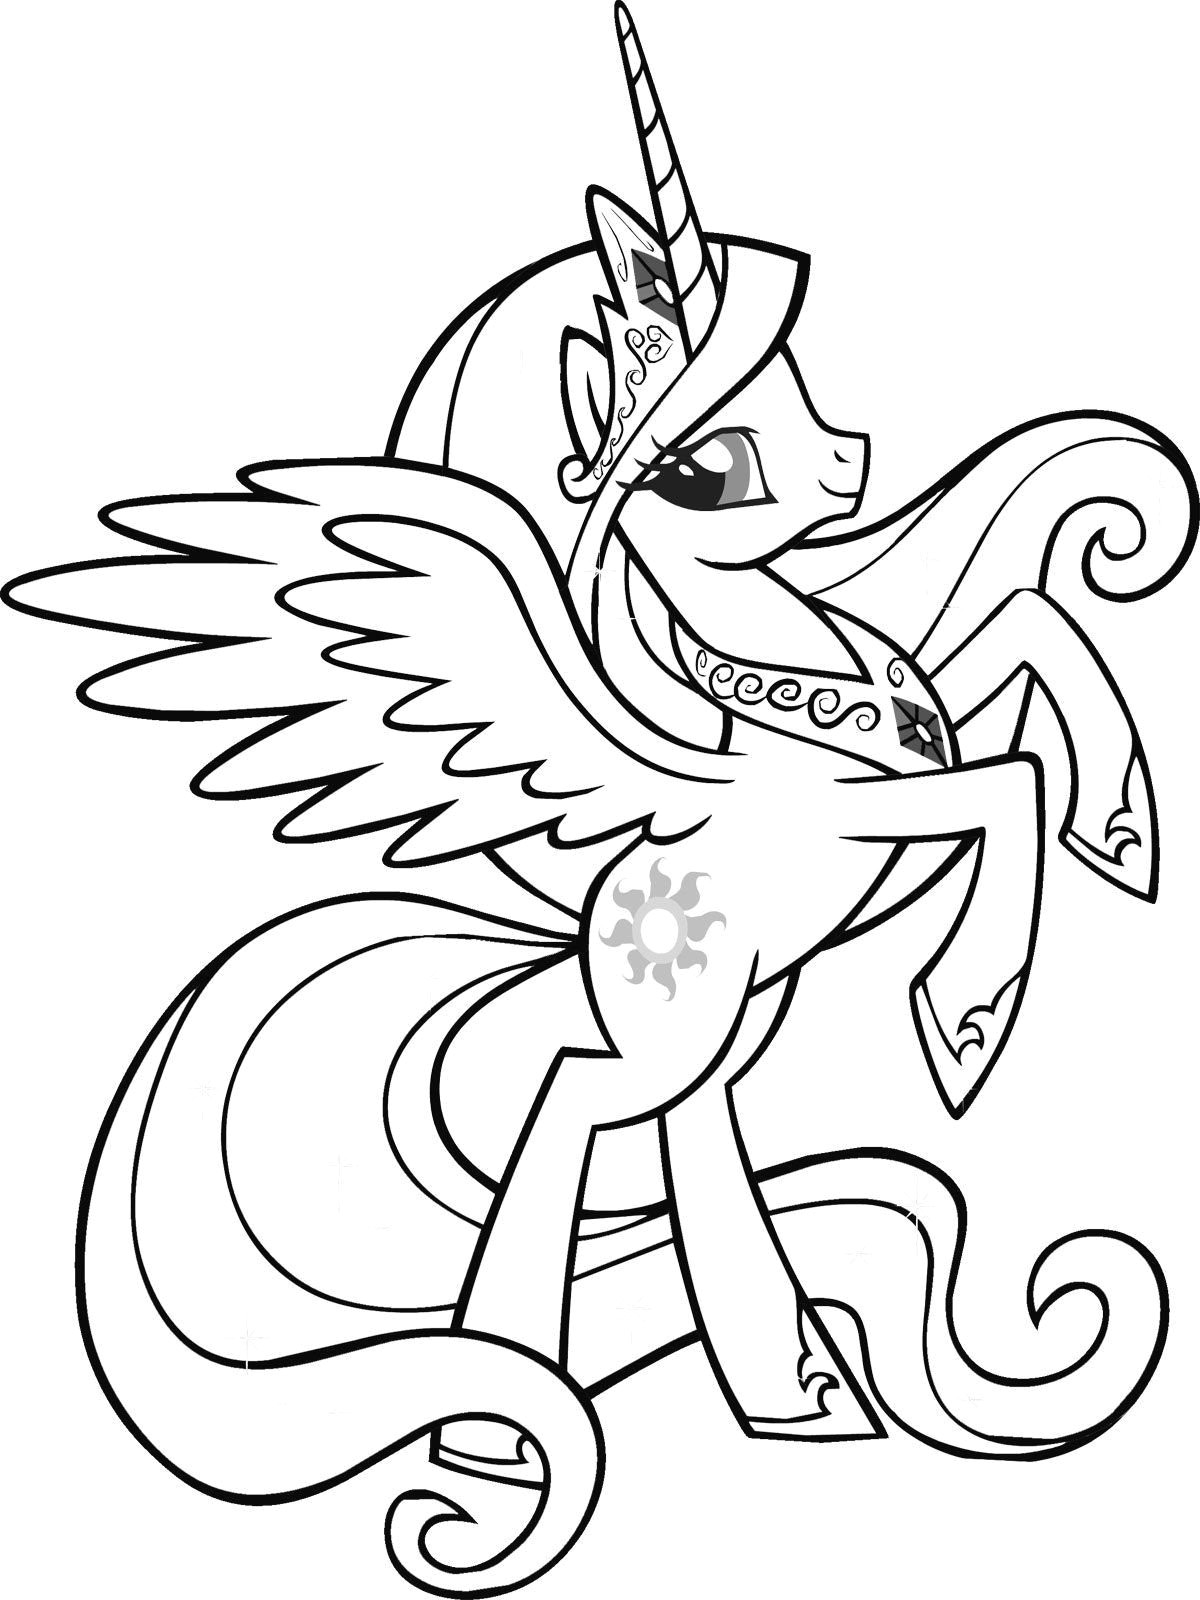 My Little Pony Drawing Easy Princess Luna My Little Pony Coloring Page Luxury My Little